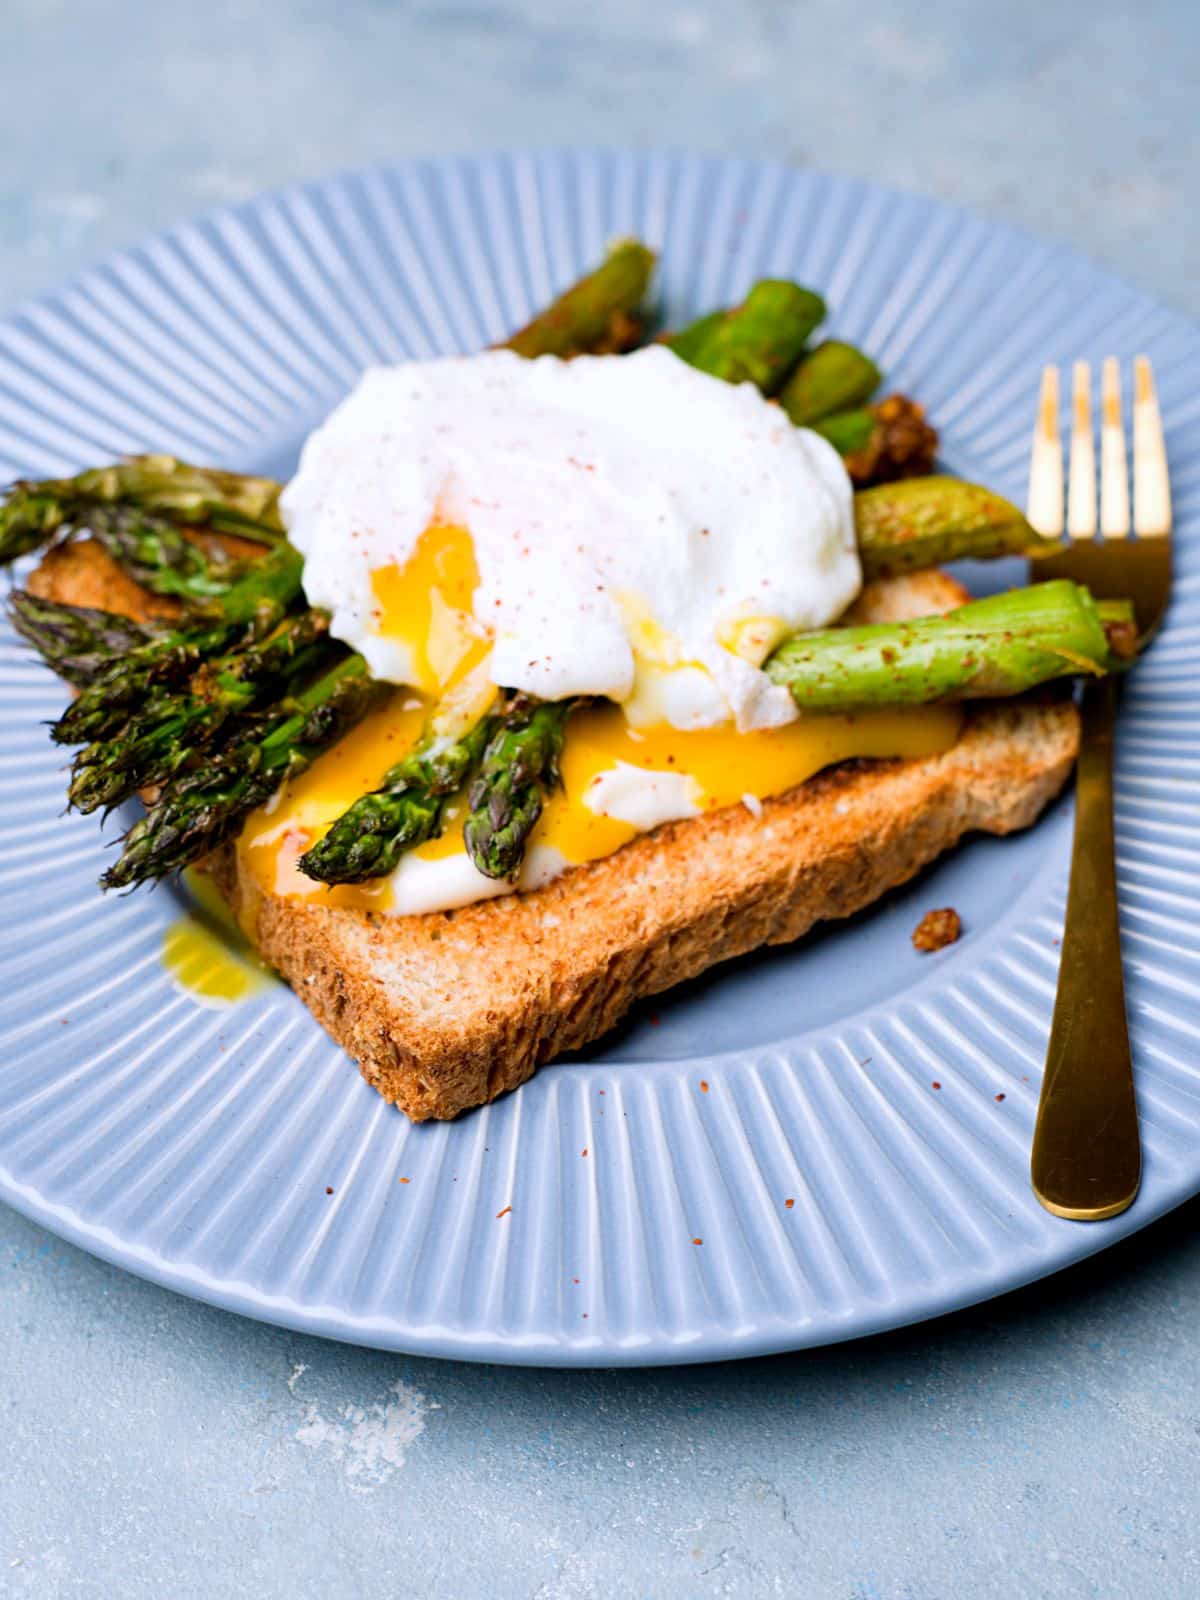 A toaste with roasted asparagus and a poached egg with egg yolk running out and a golden fork on blue plate, 